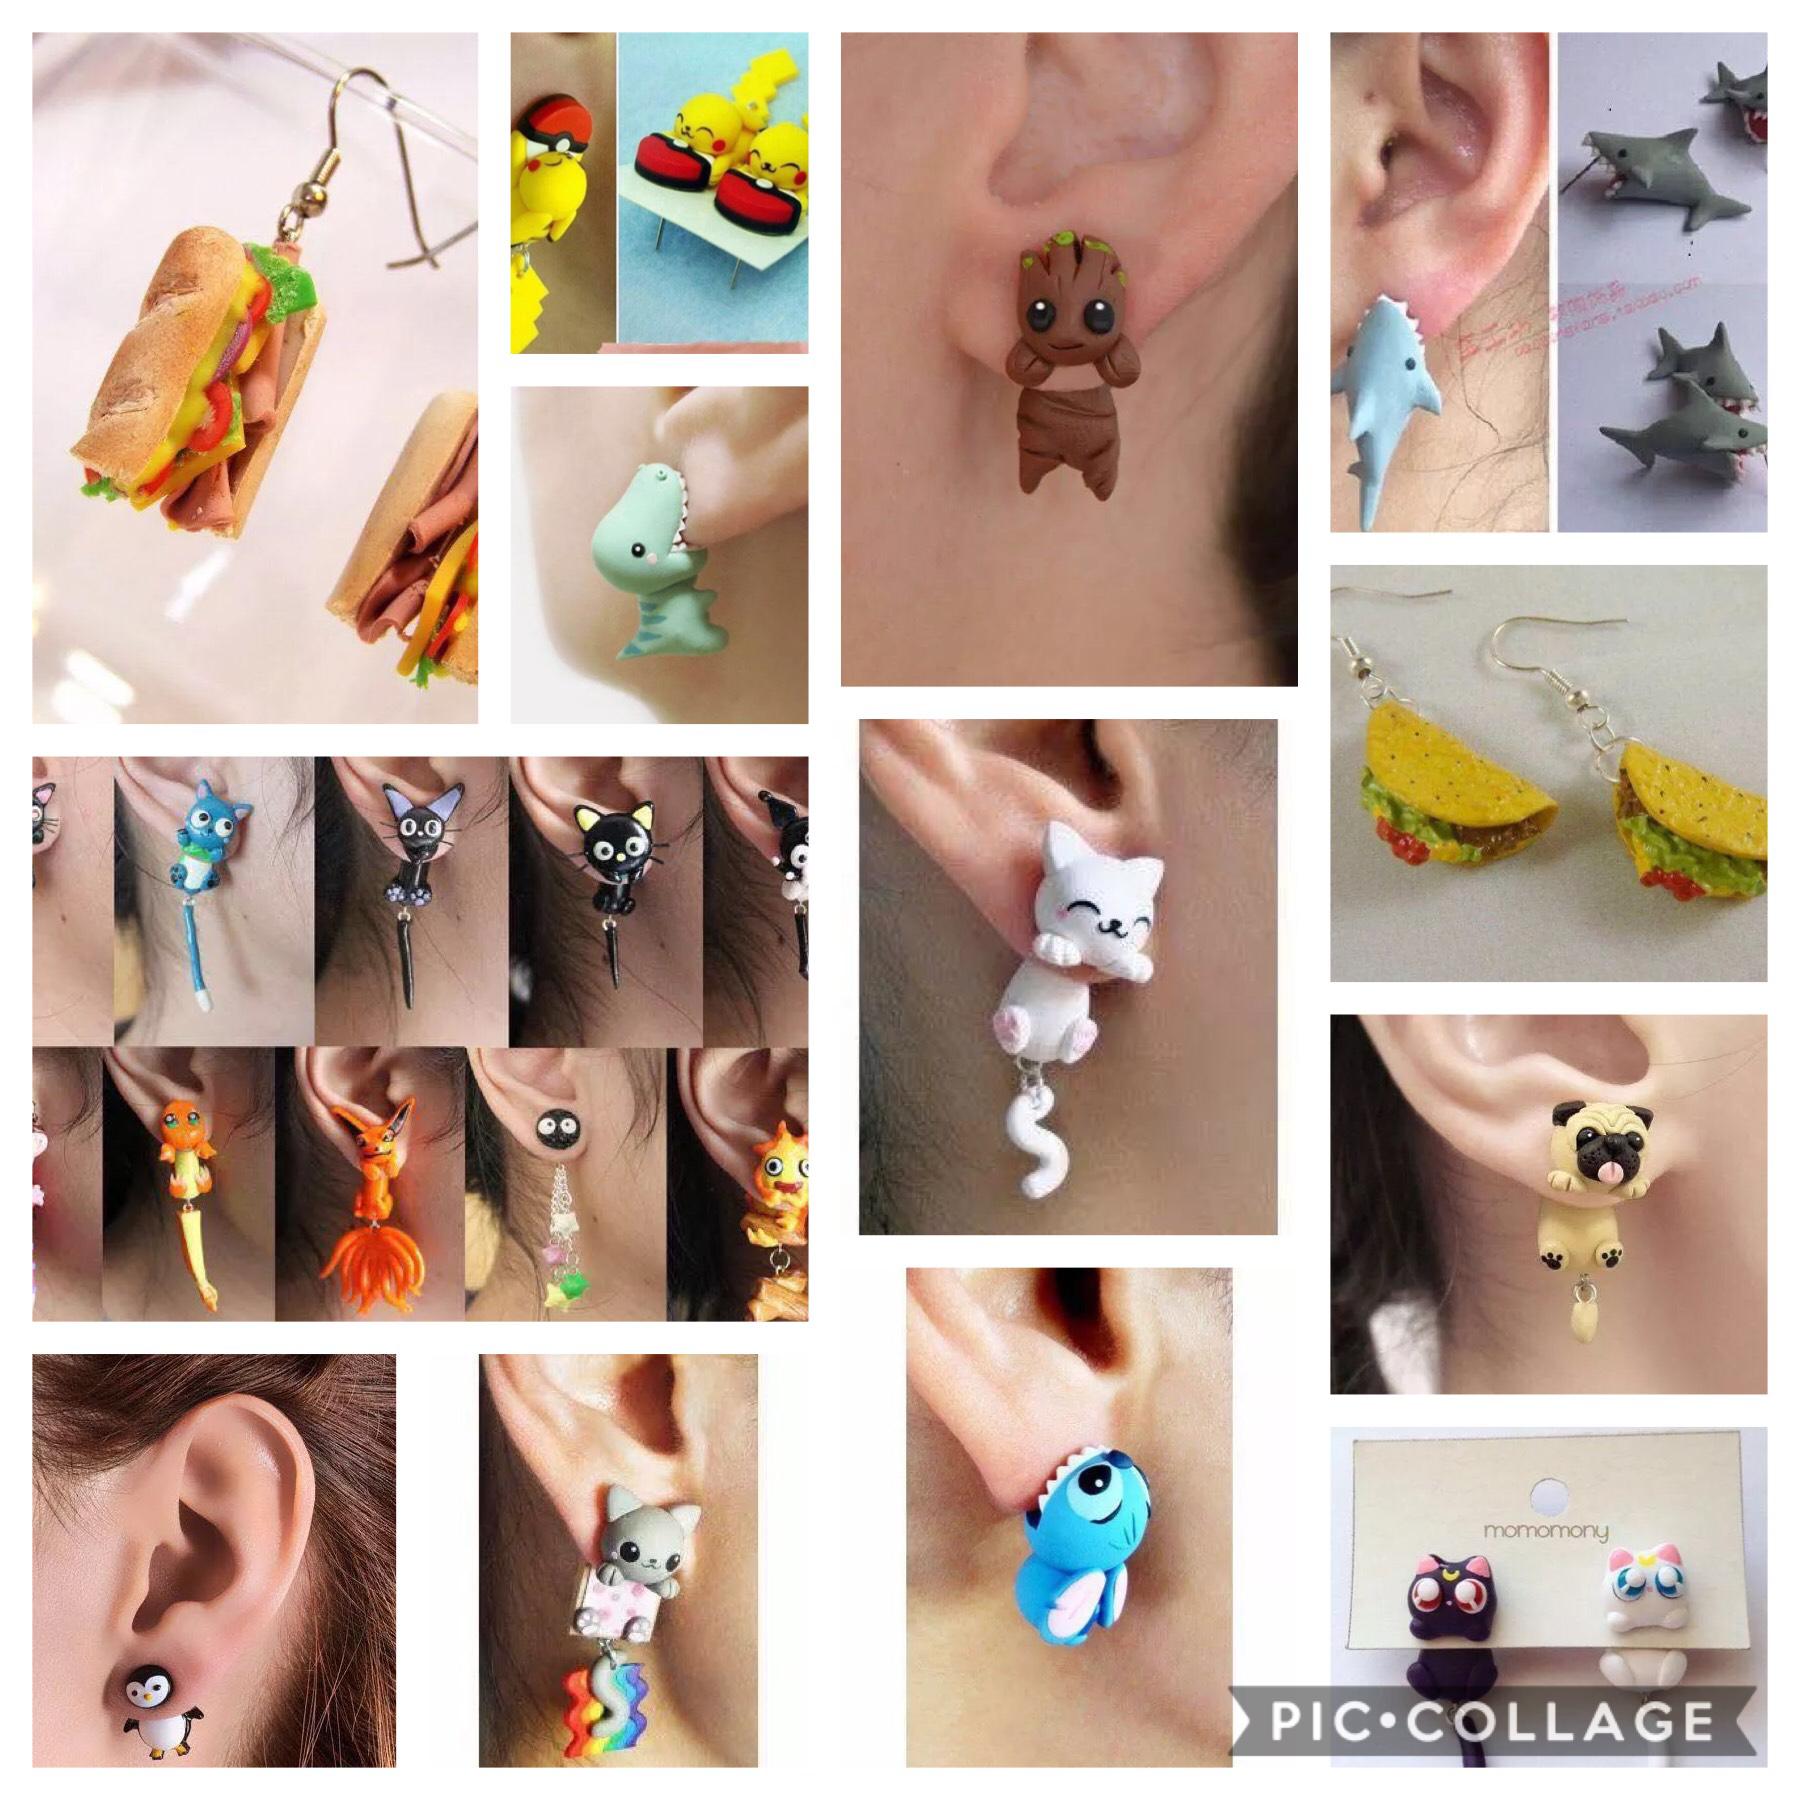 Most adorable earrings ever 